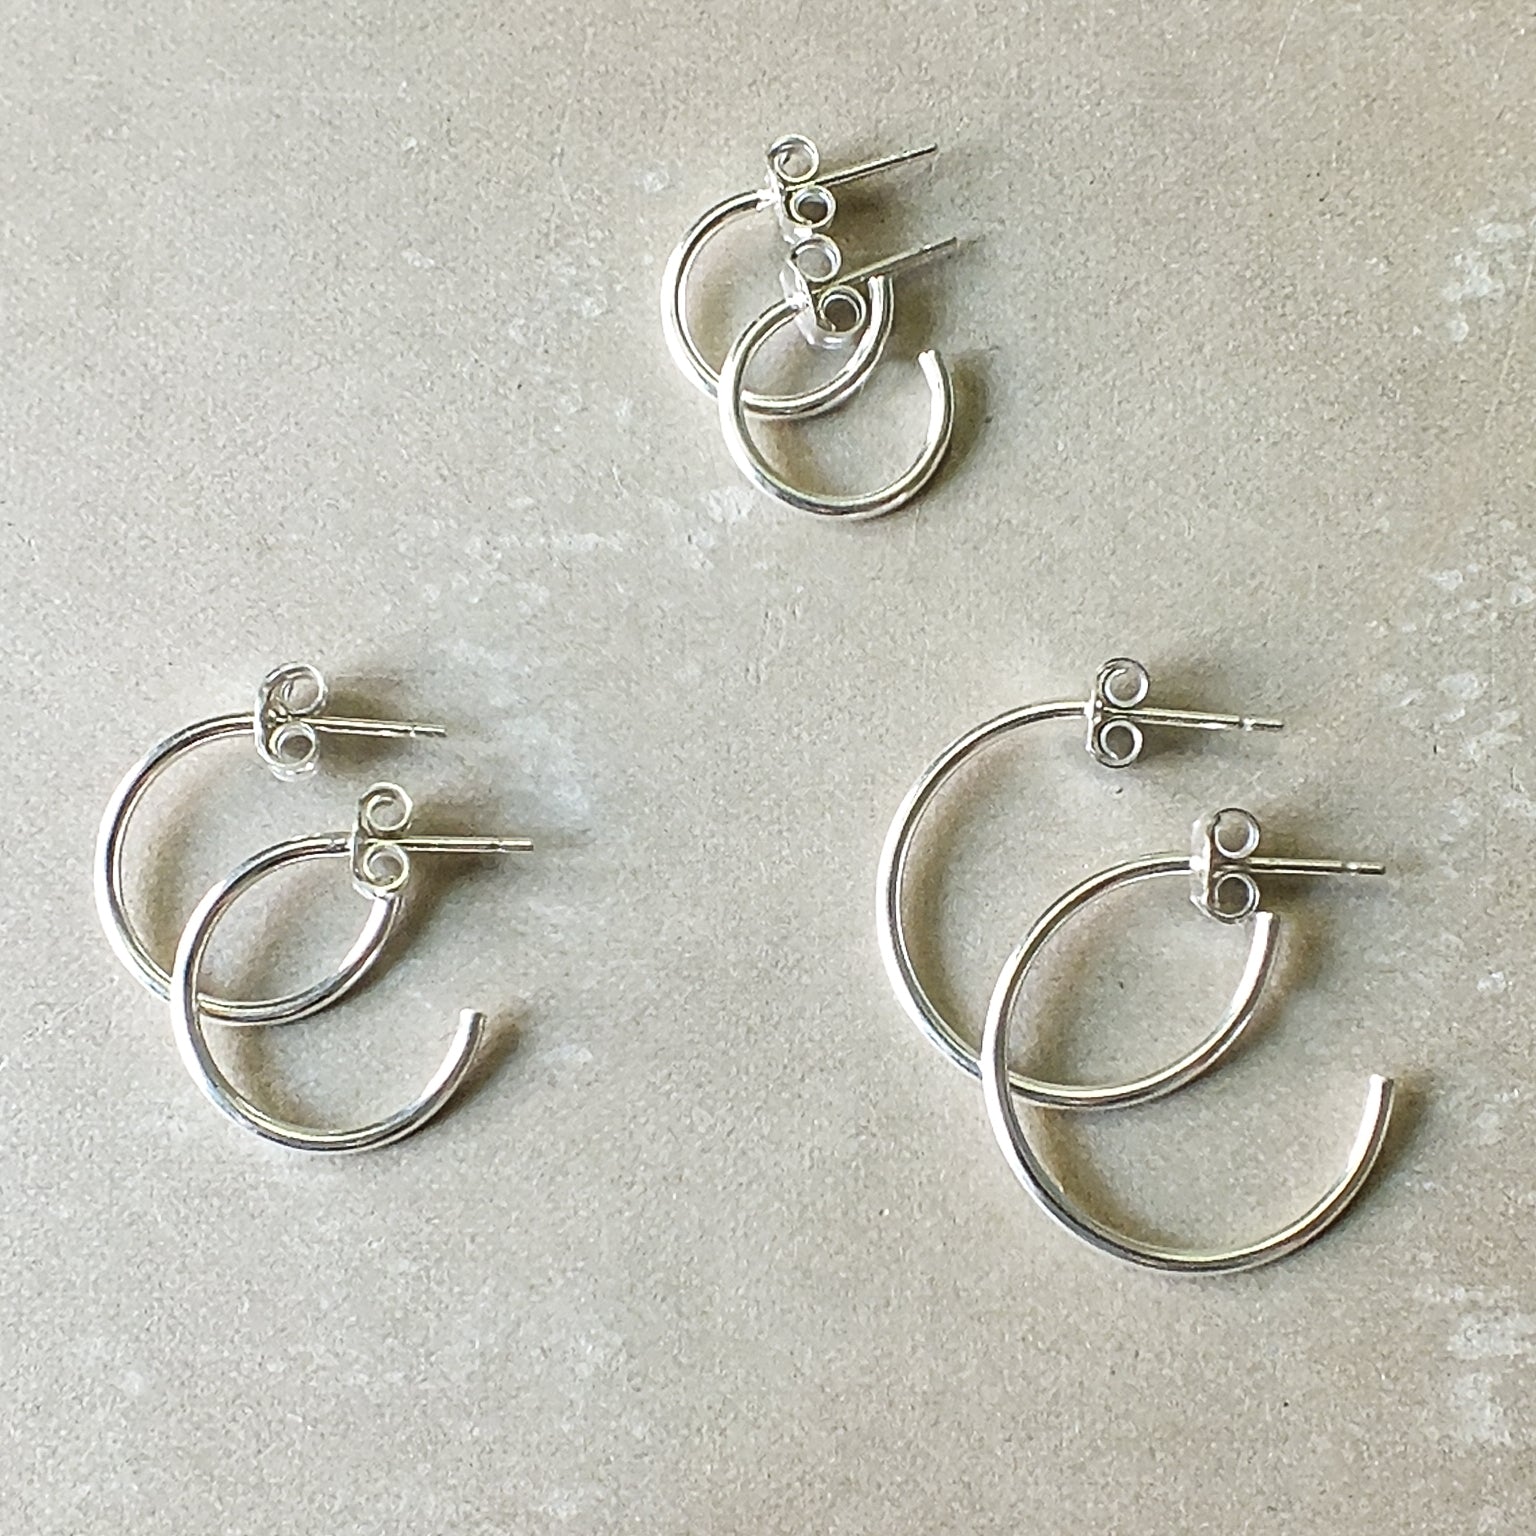 A set of Becoming Jewelry sterling silver Open Hoop Earrings, large displayed on a gray background.